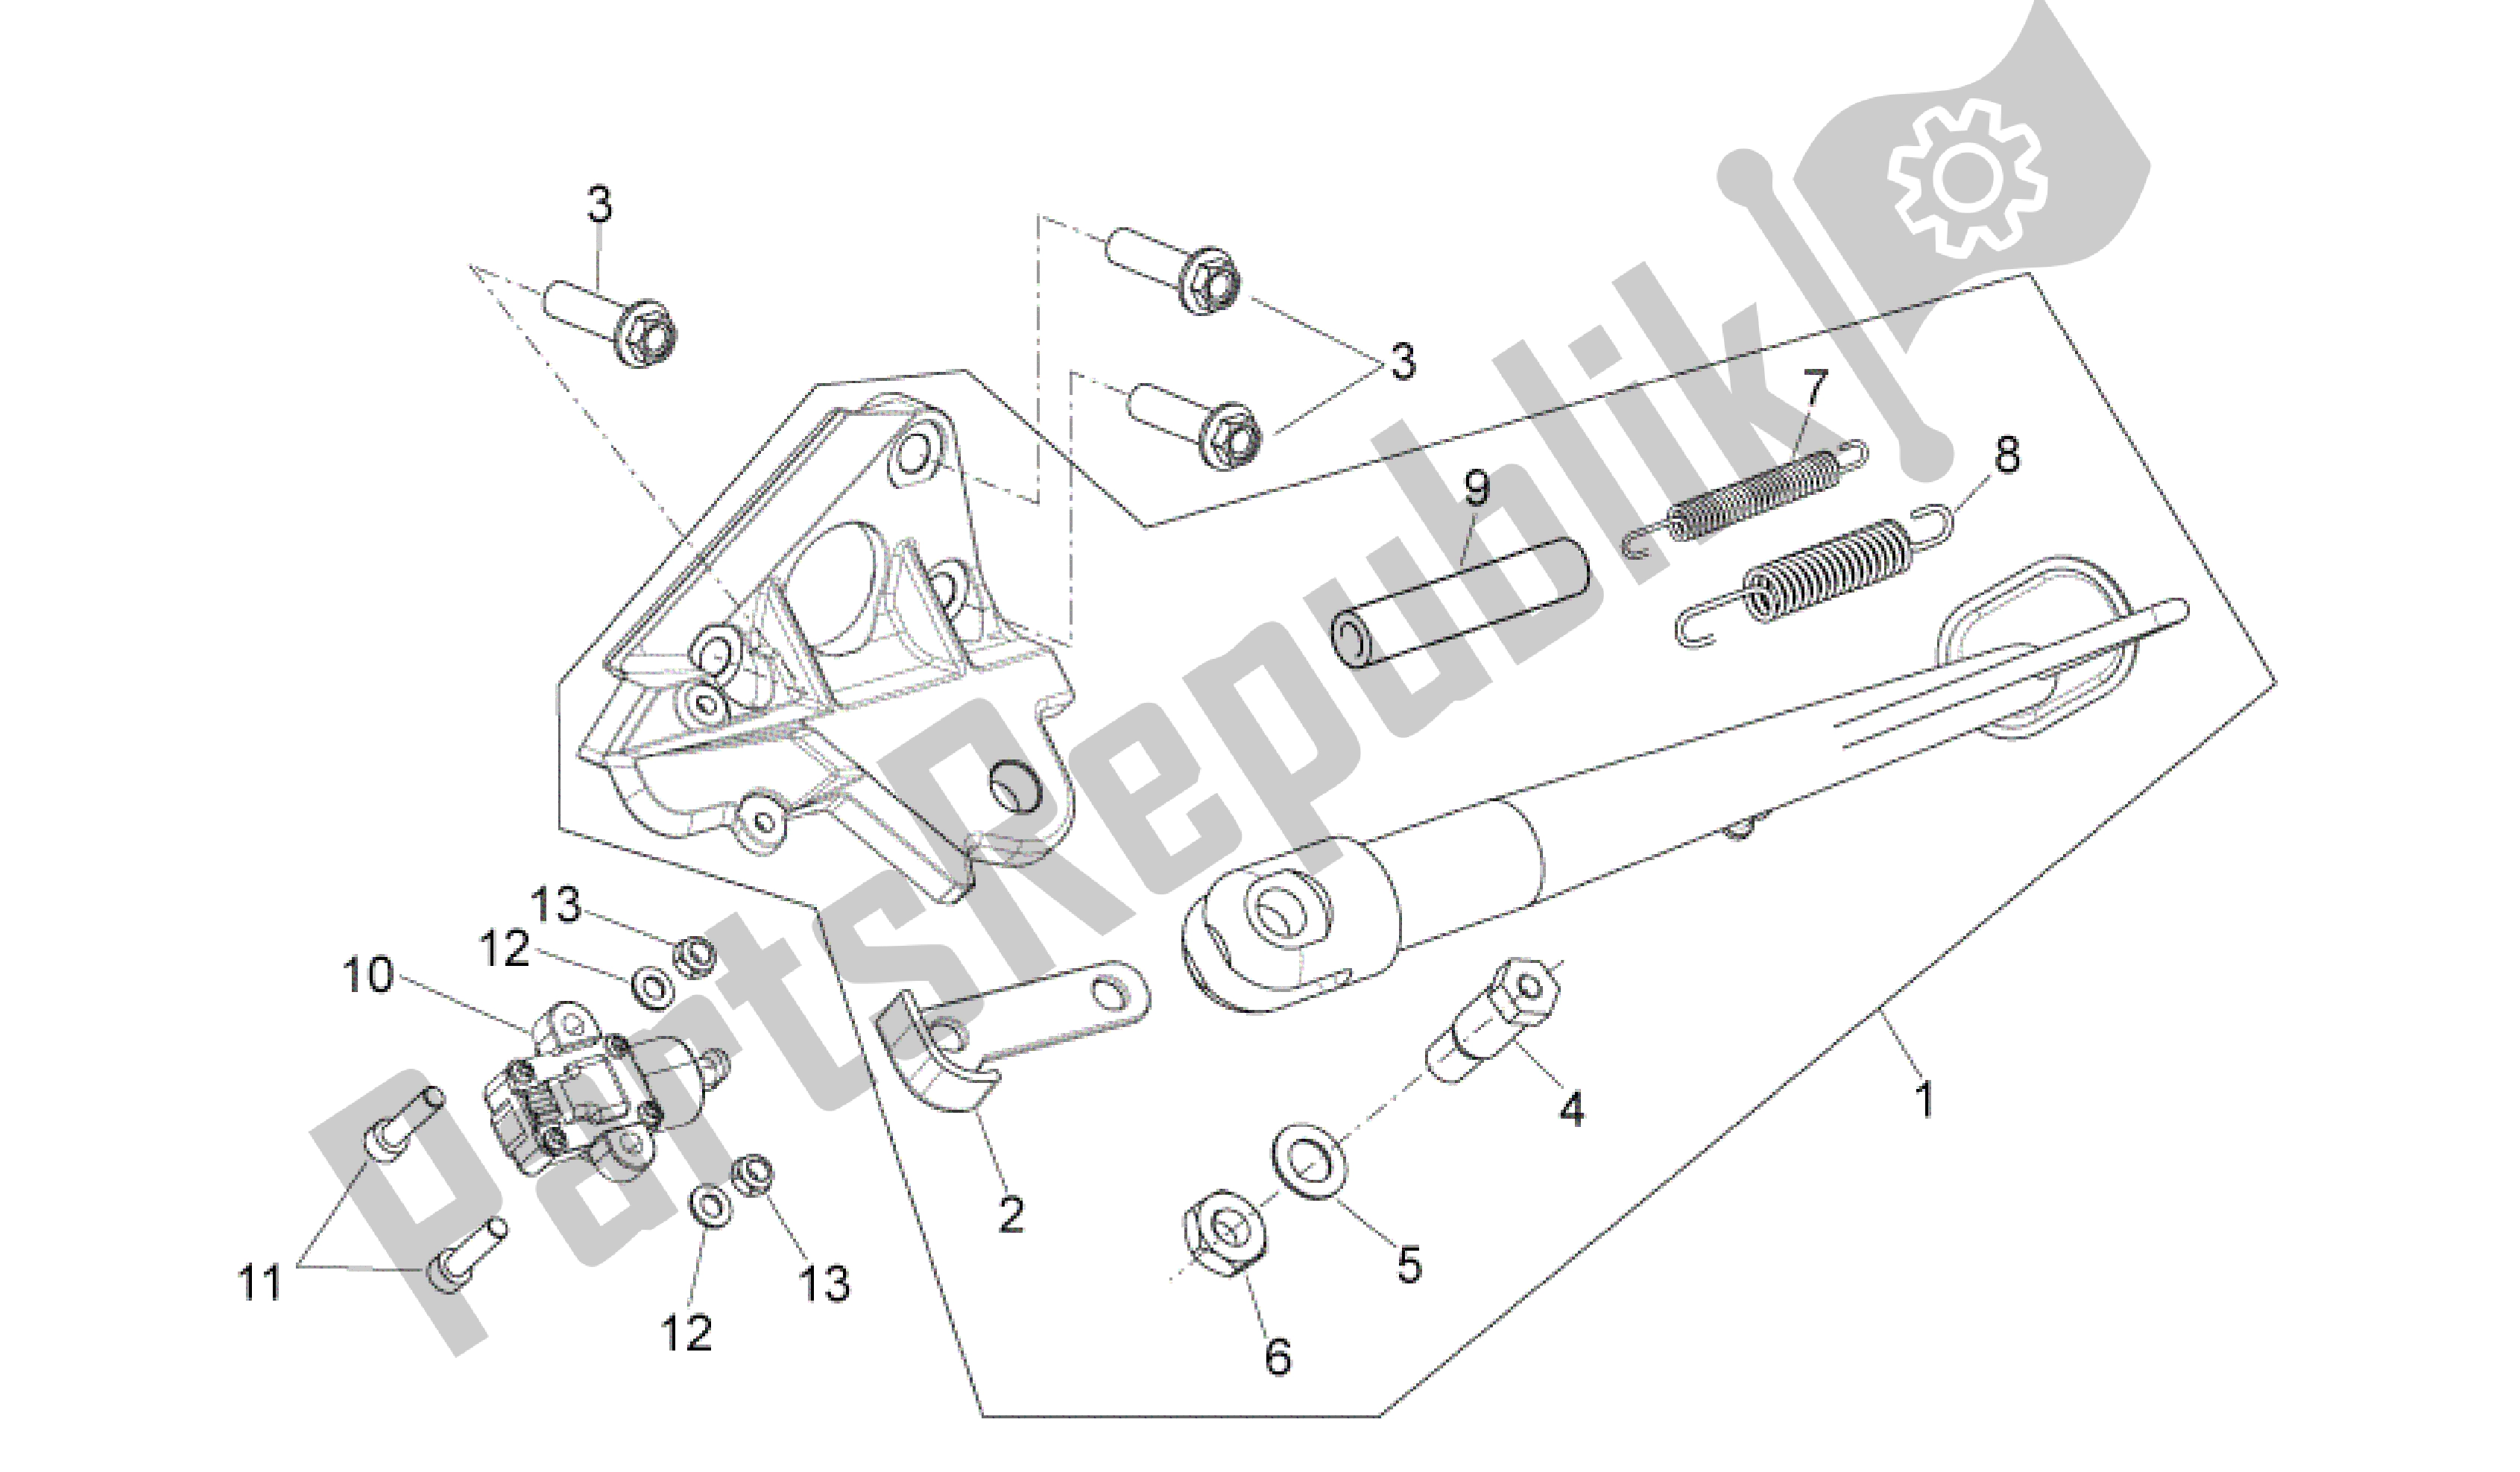 All parts for the Central Stand of the Aprilia Shiver 750 2007 - 2009